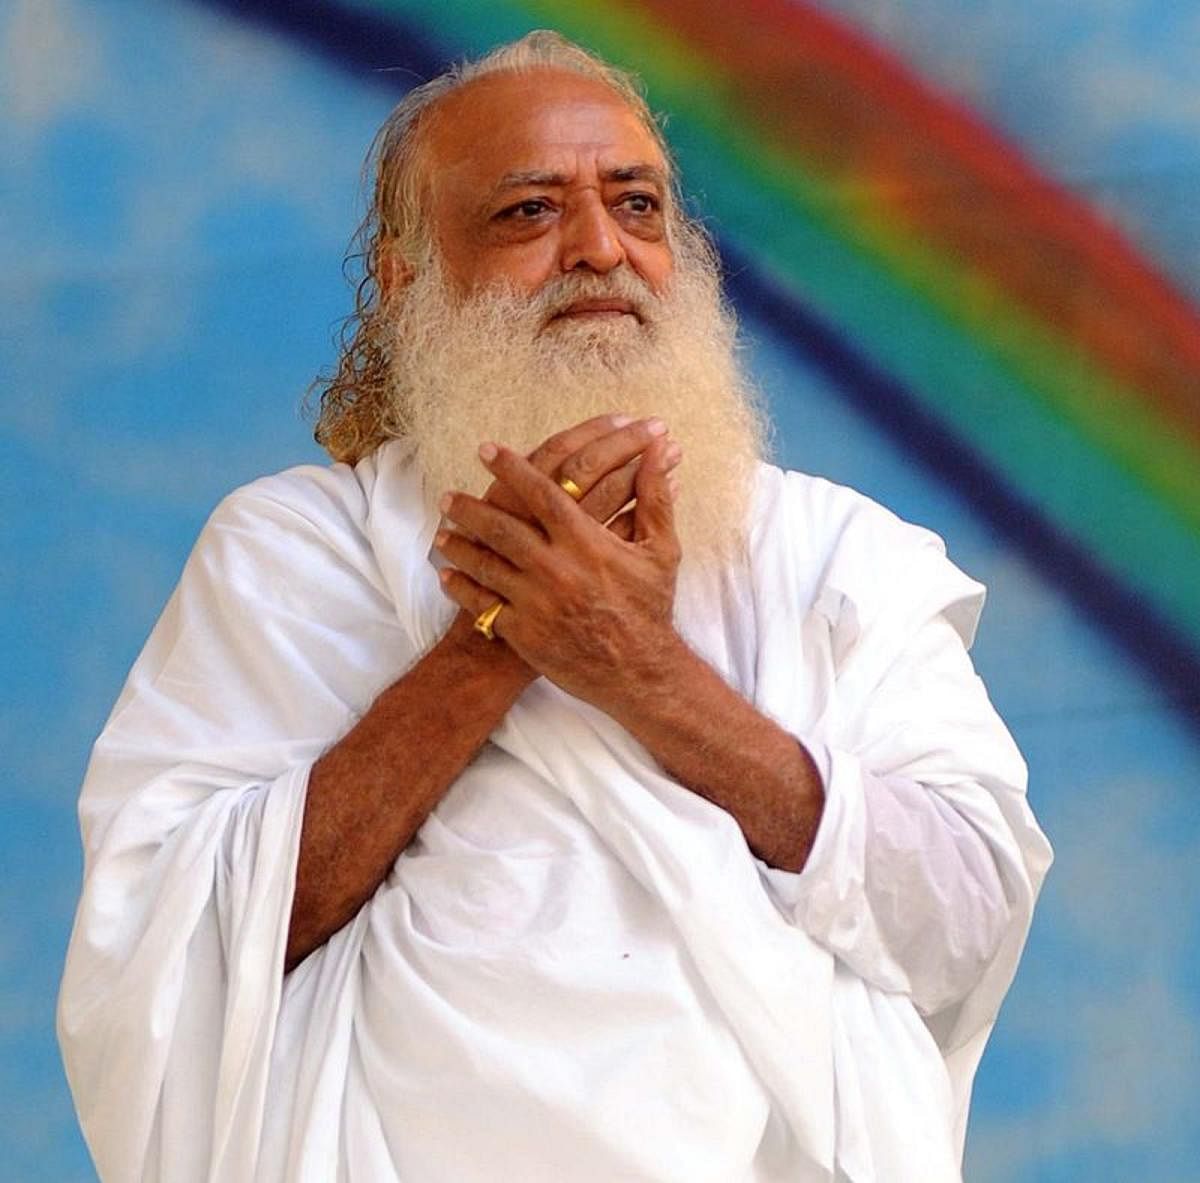 The godman had requested the court that his case be heard on a priority due to his poor health and old age.